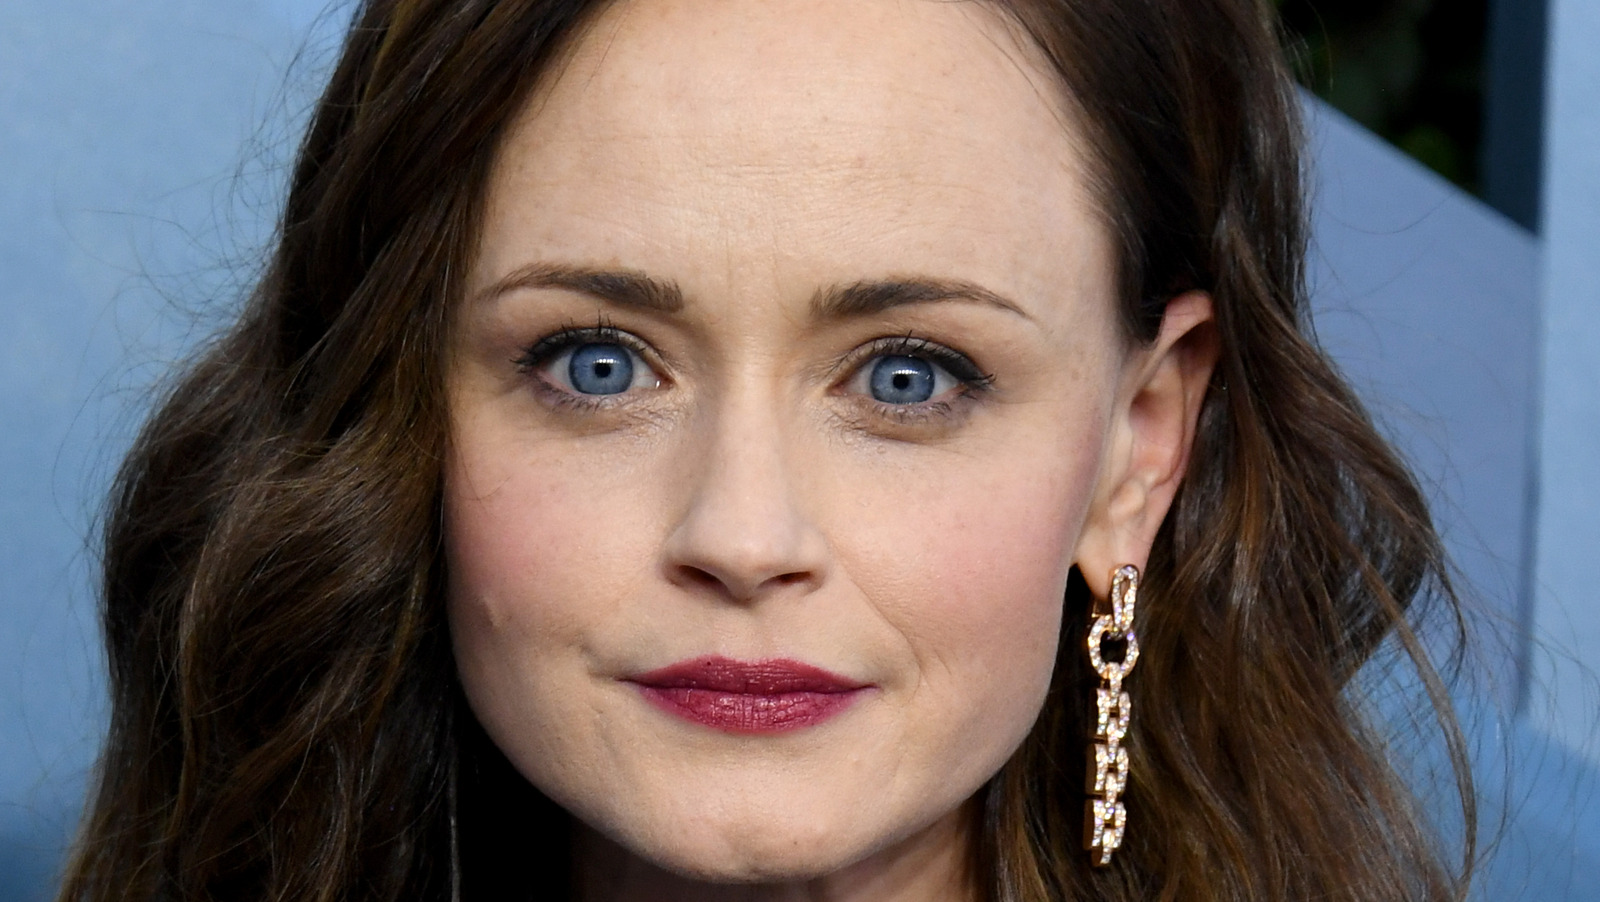 Alexis Bledel on Who Her Gilmore Girls Character Should've Been With